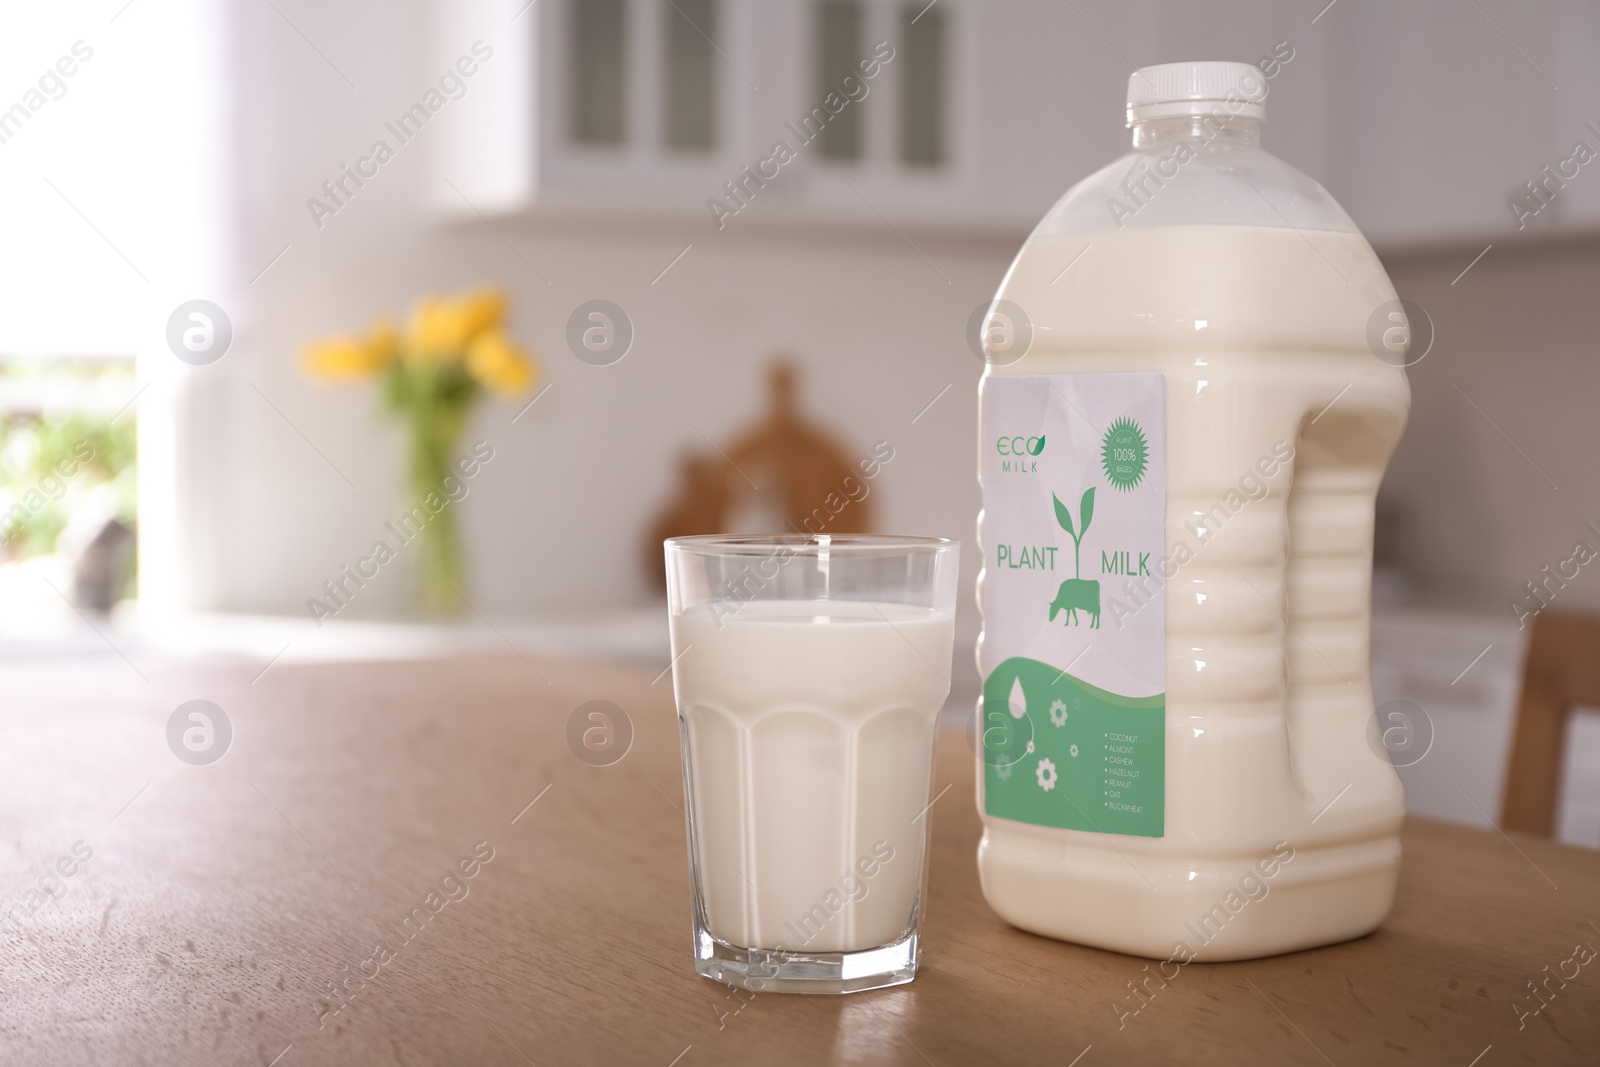 Image of Gallon bottle and glass of vegan milk on wooden table in kitchen. Space for text